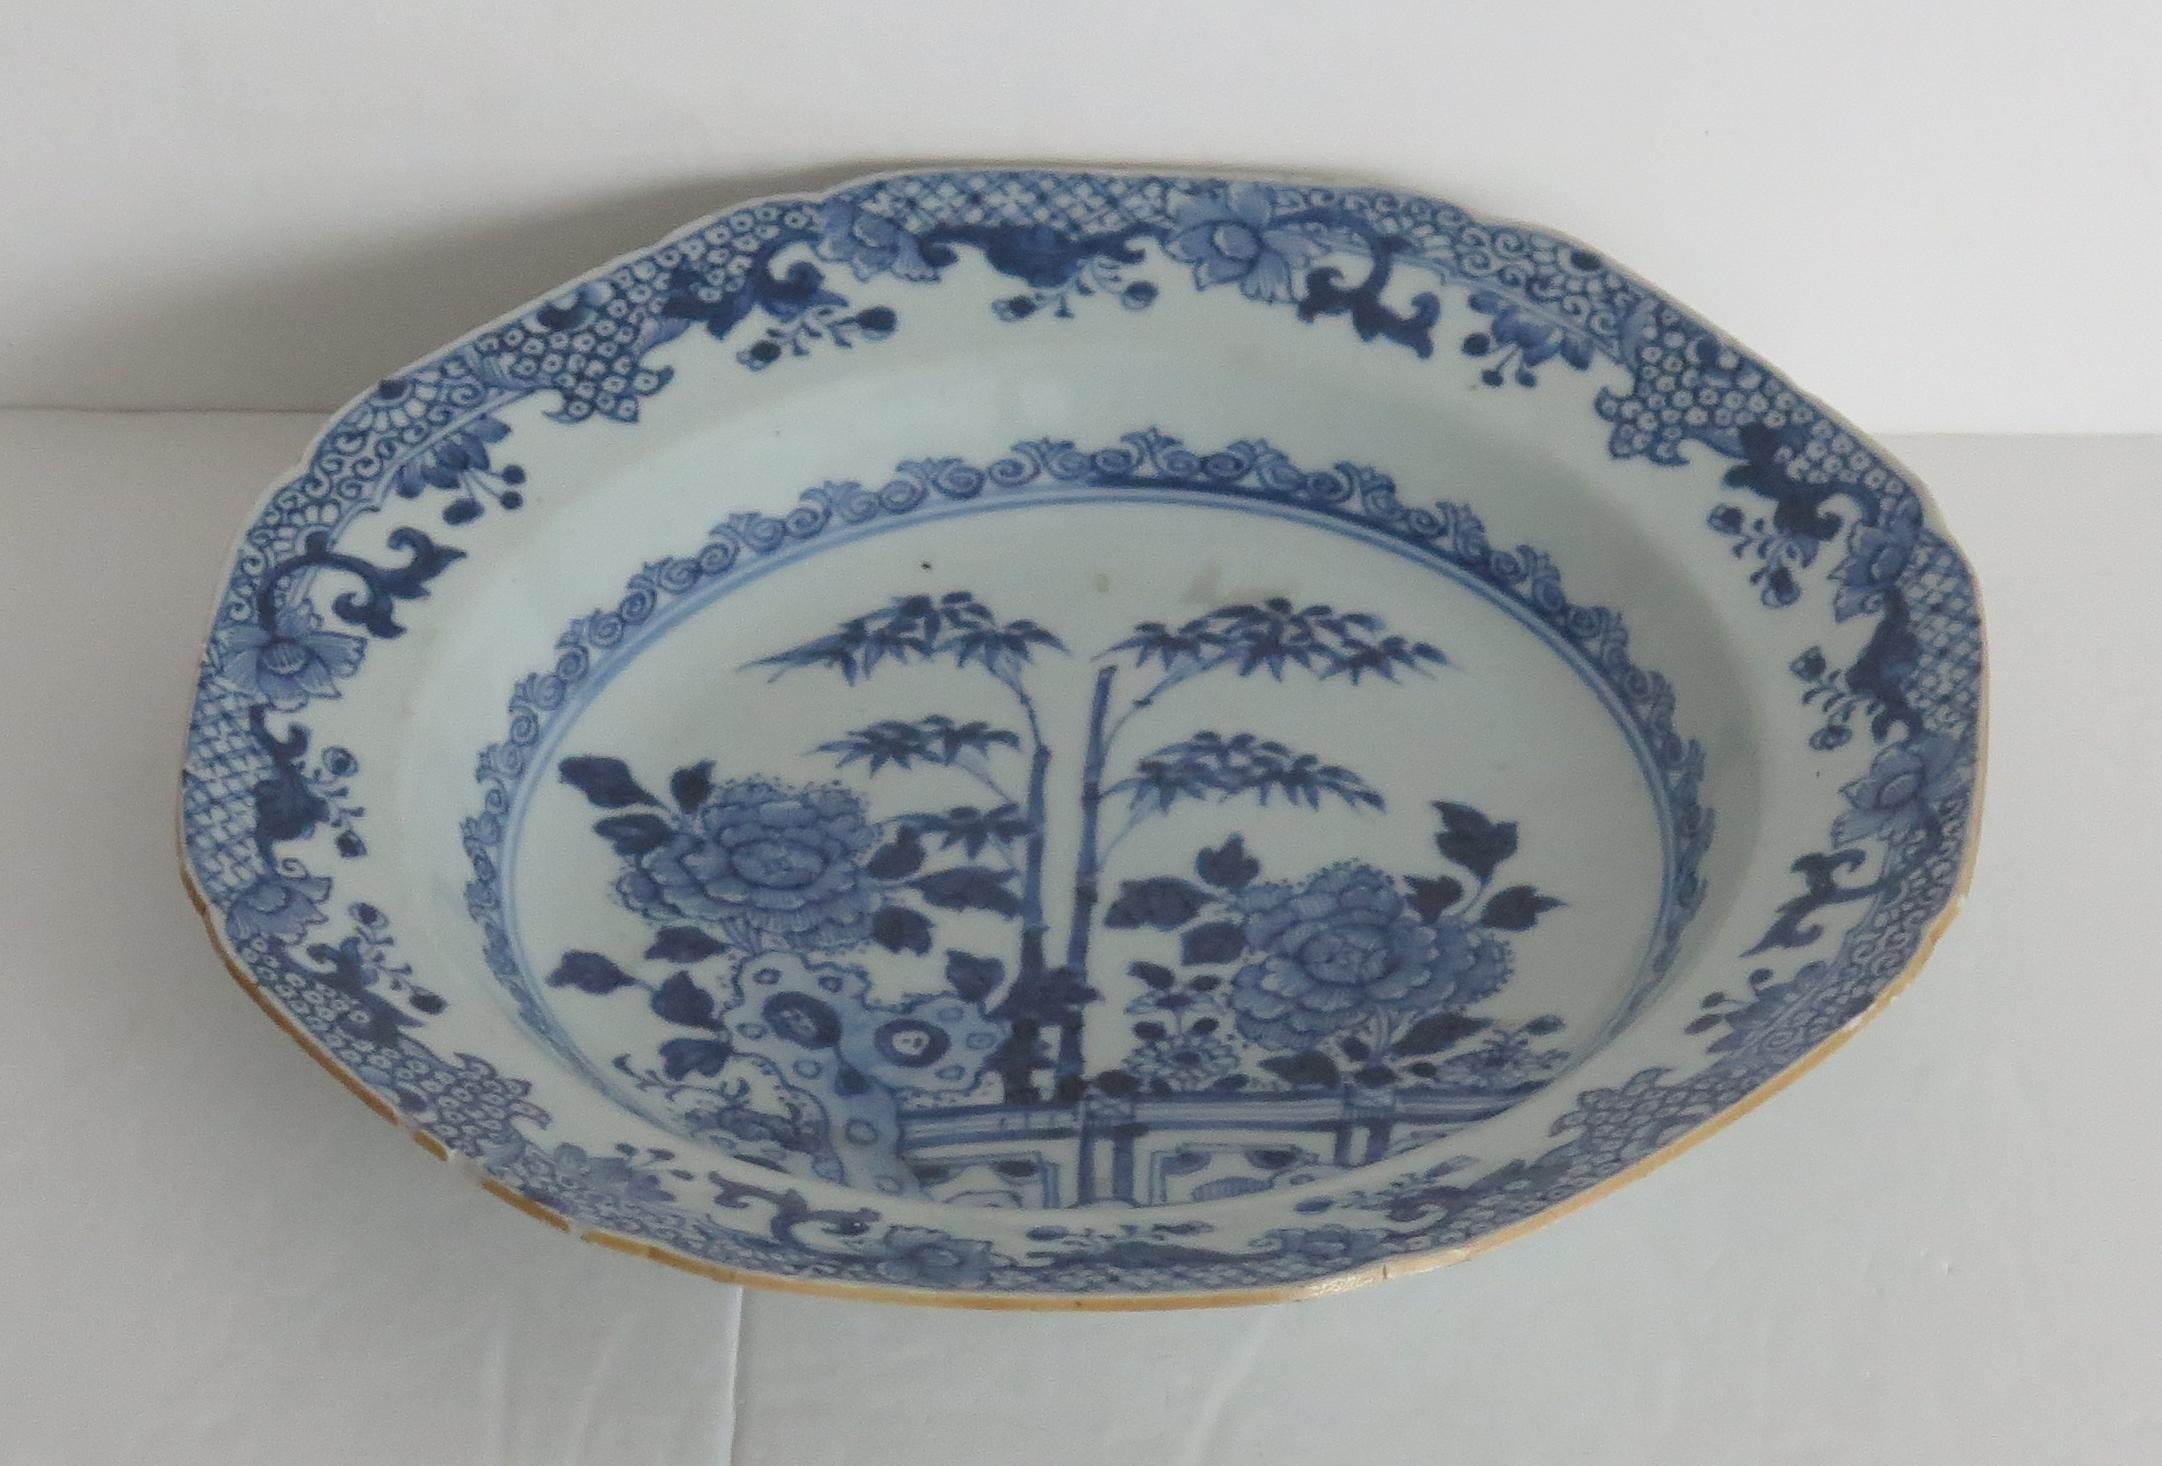 Chinese Export Soup or Deep Plate Canton Blue & White Porcelain, Qing circa 1770 2